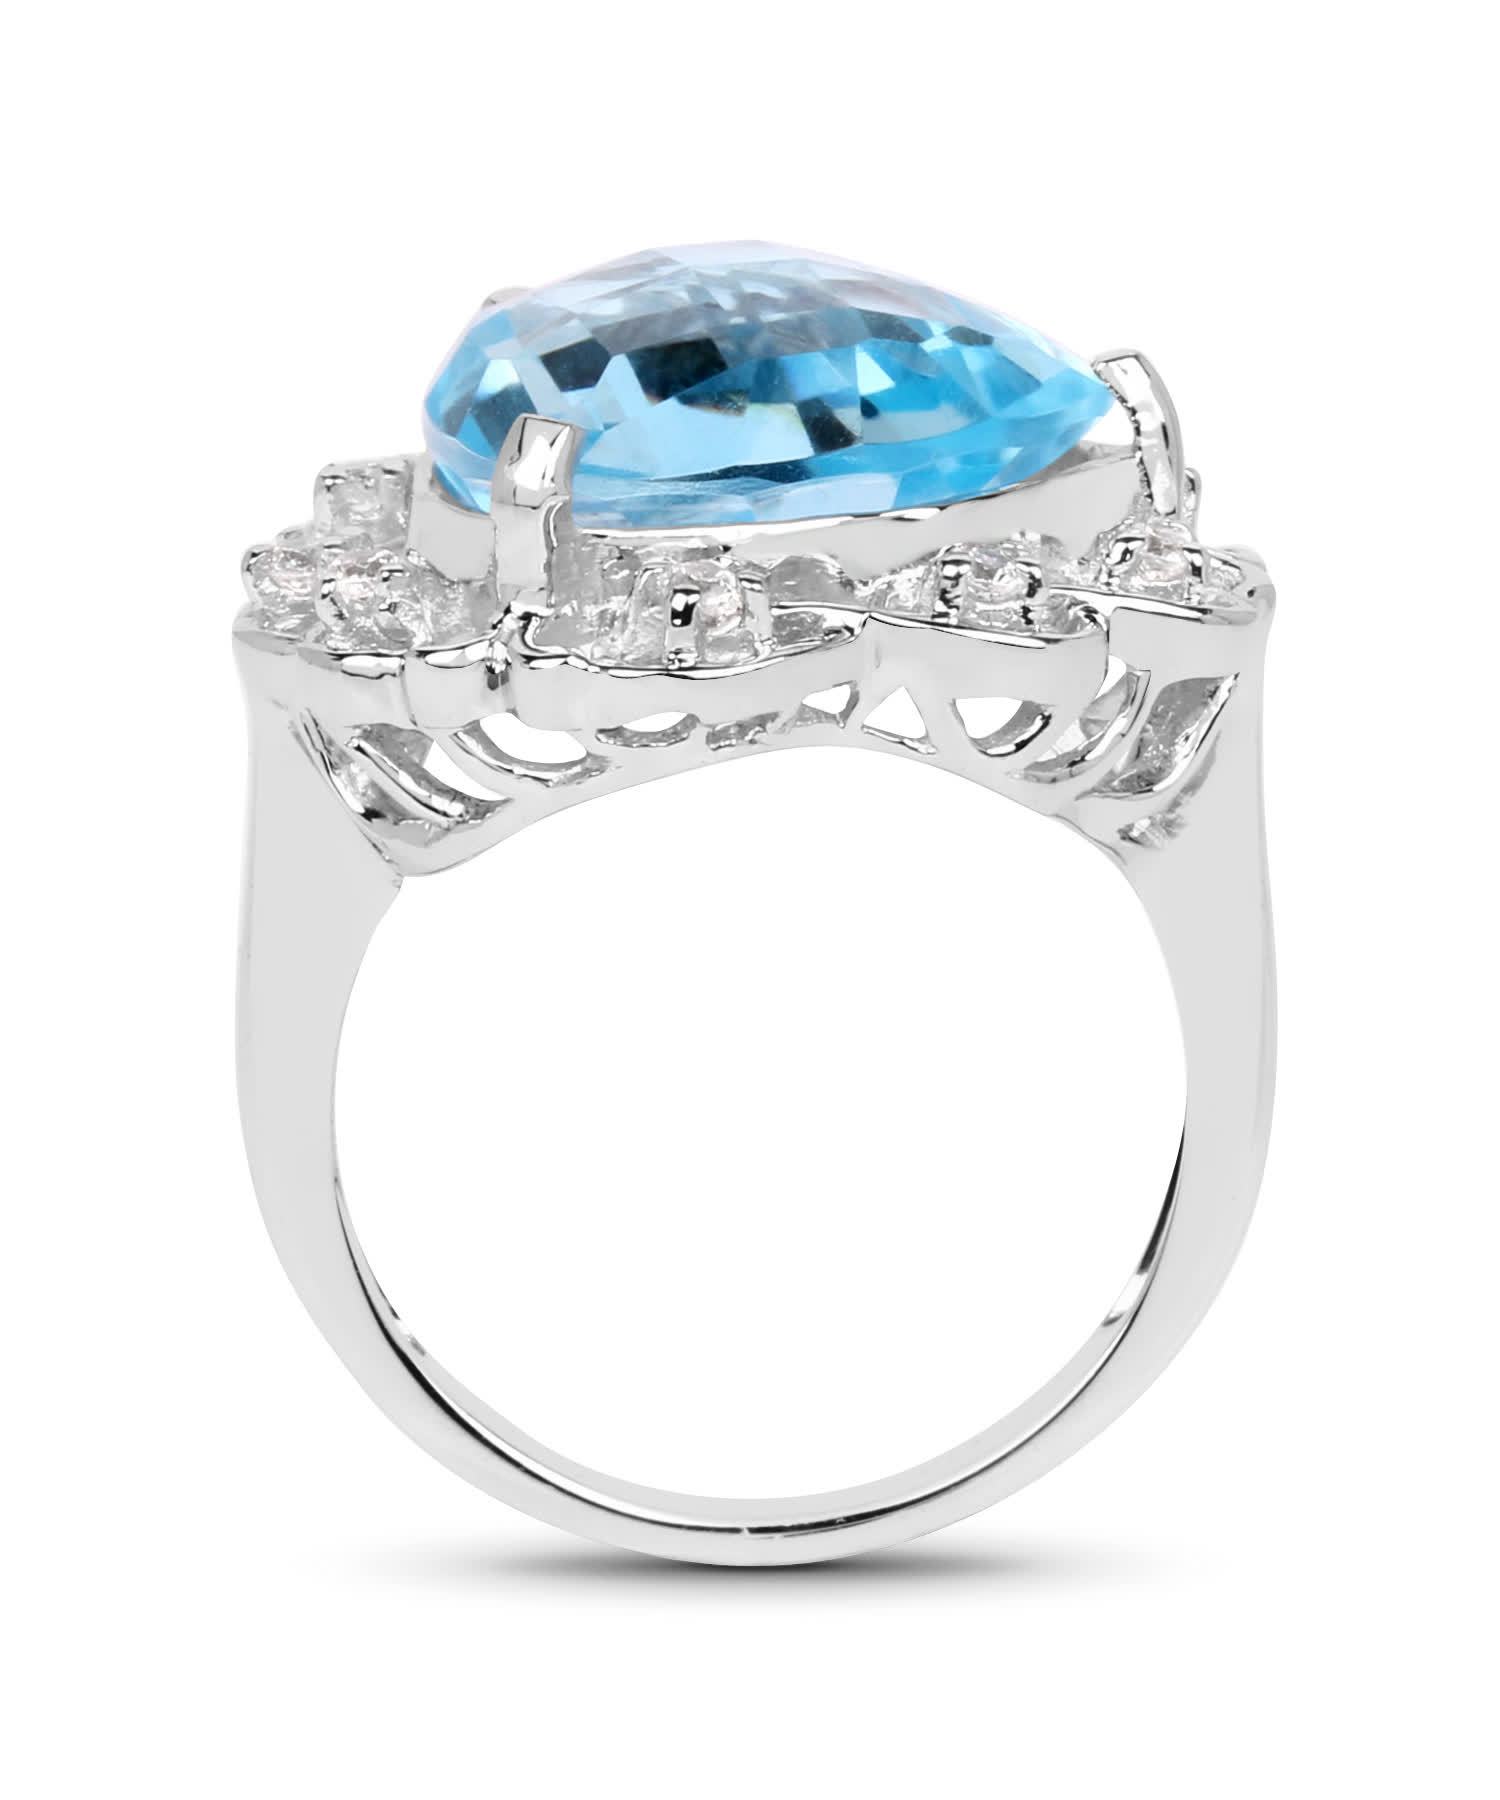 11.01ctw Natural Swiss Blue Topaz and Zircon Rhodium Plated 925 Sterling Silver Triangle Cocktail Ring View 2